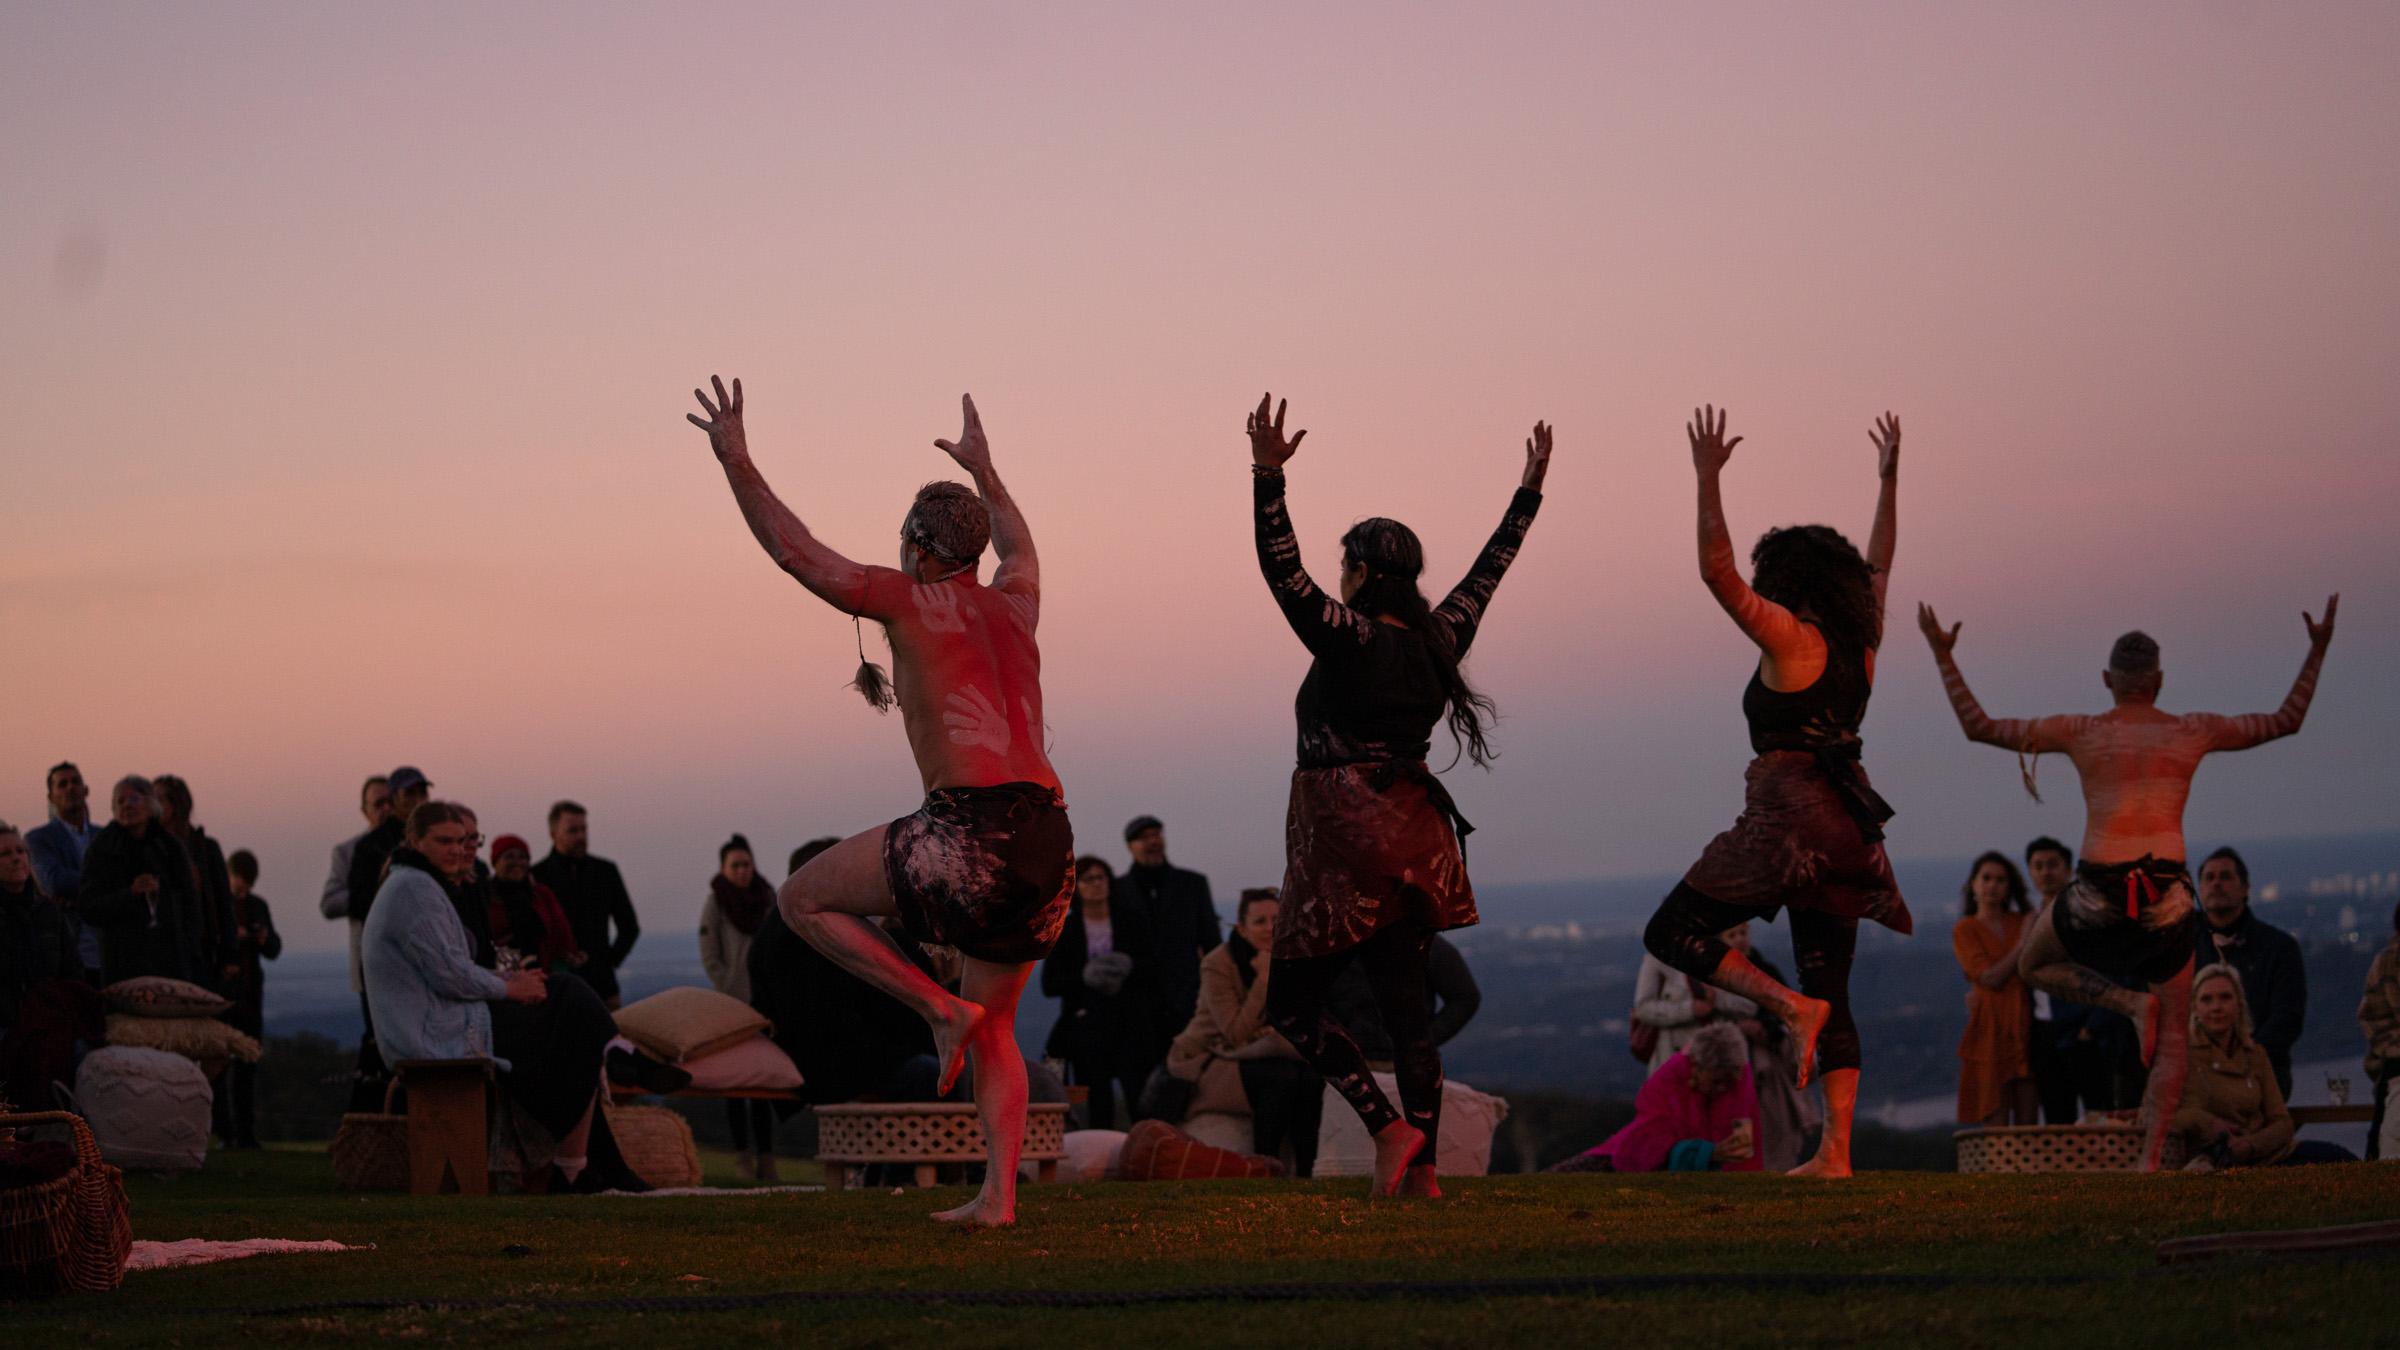 Four First Nations performers dance for an excited crowd at sunset in the Scenic Rim